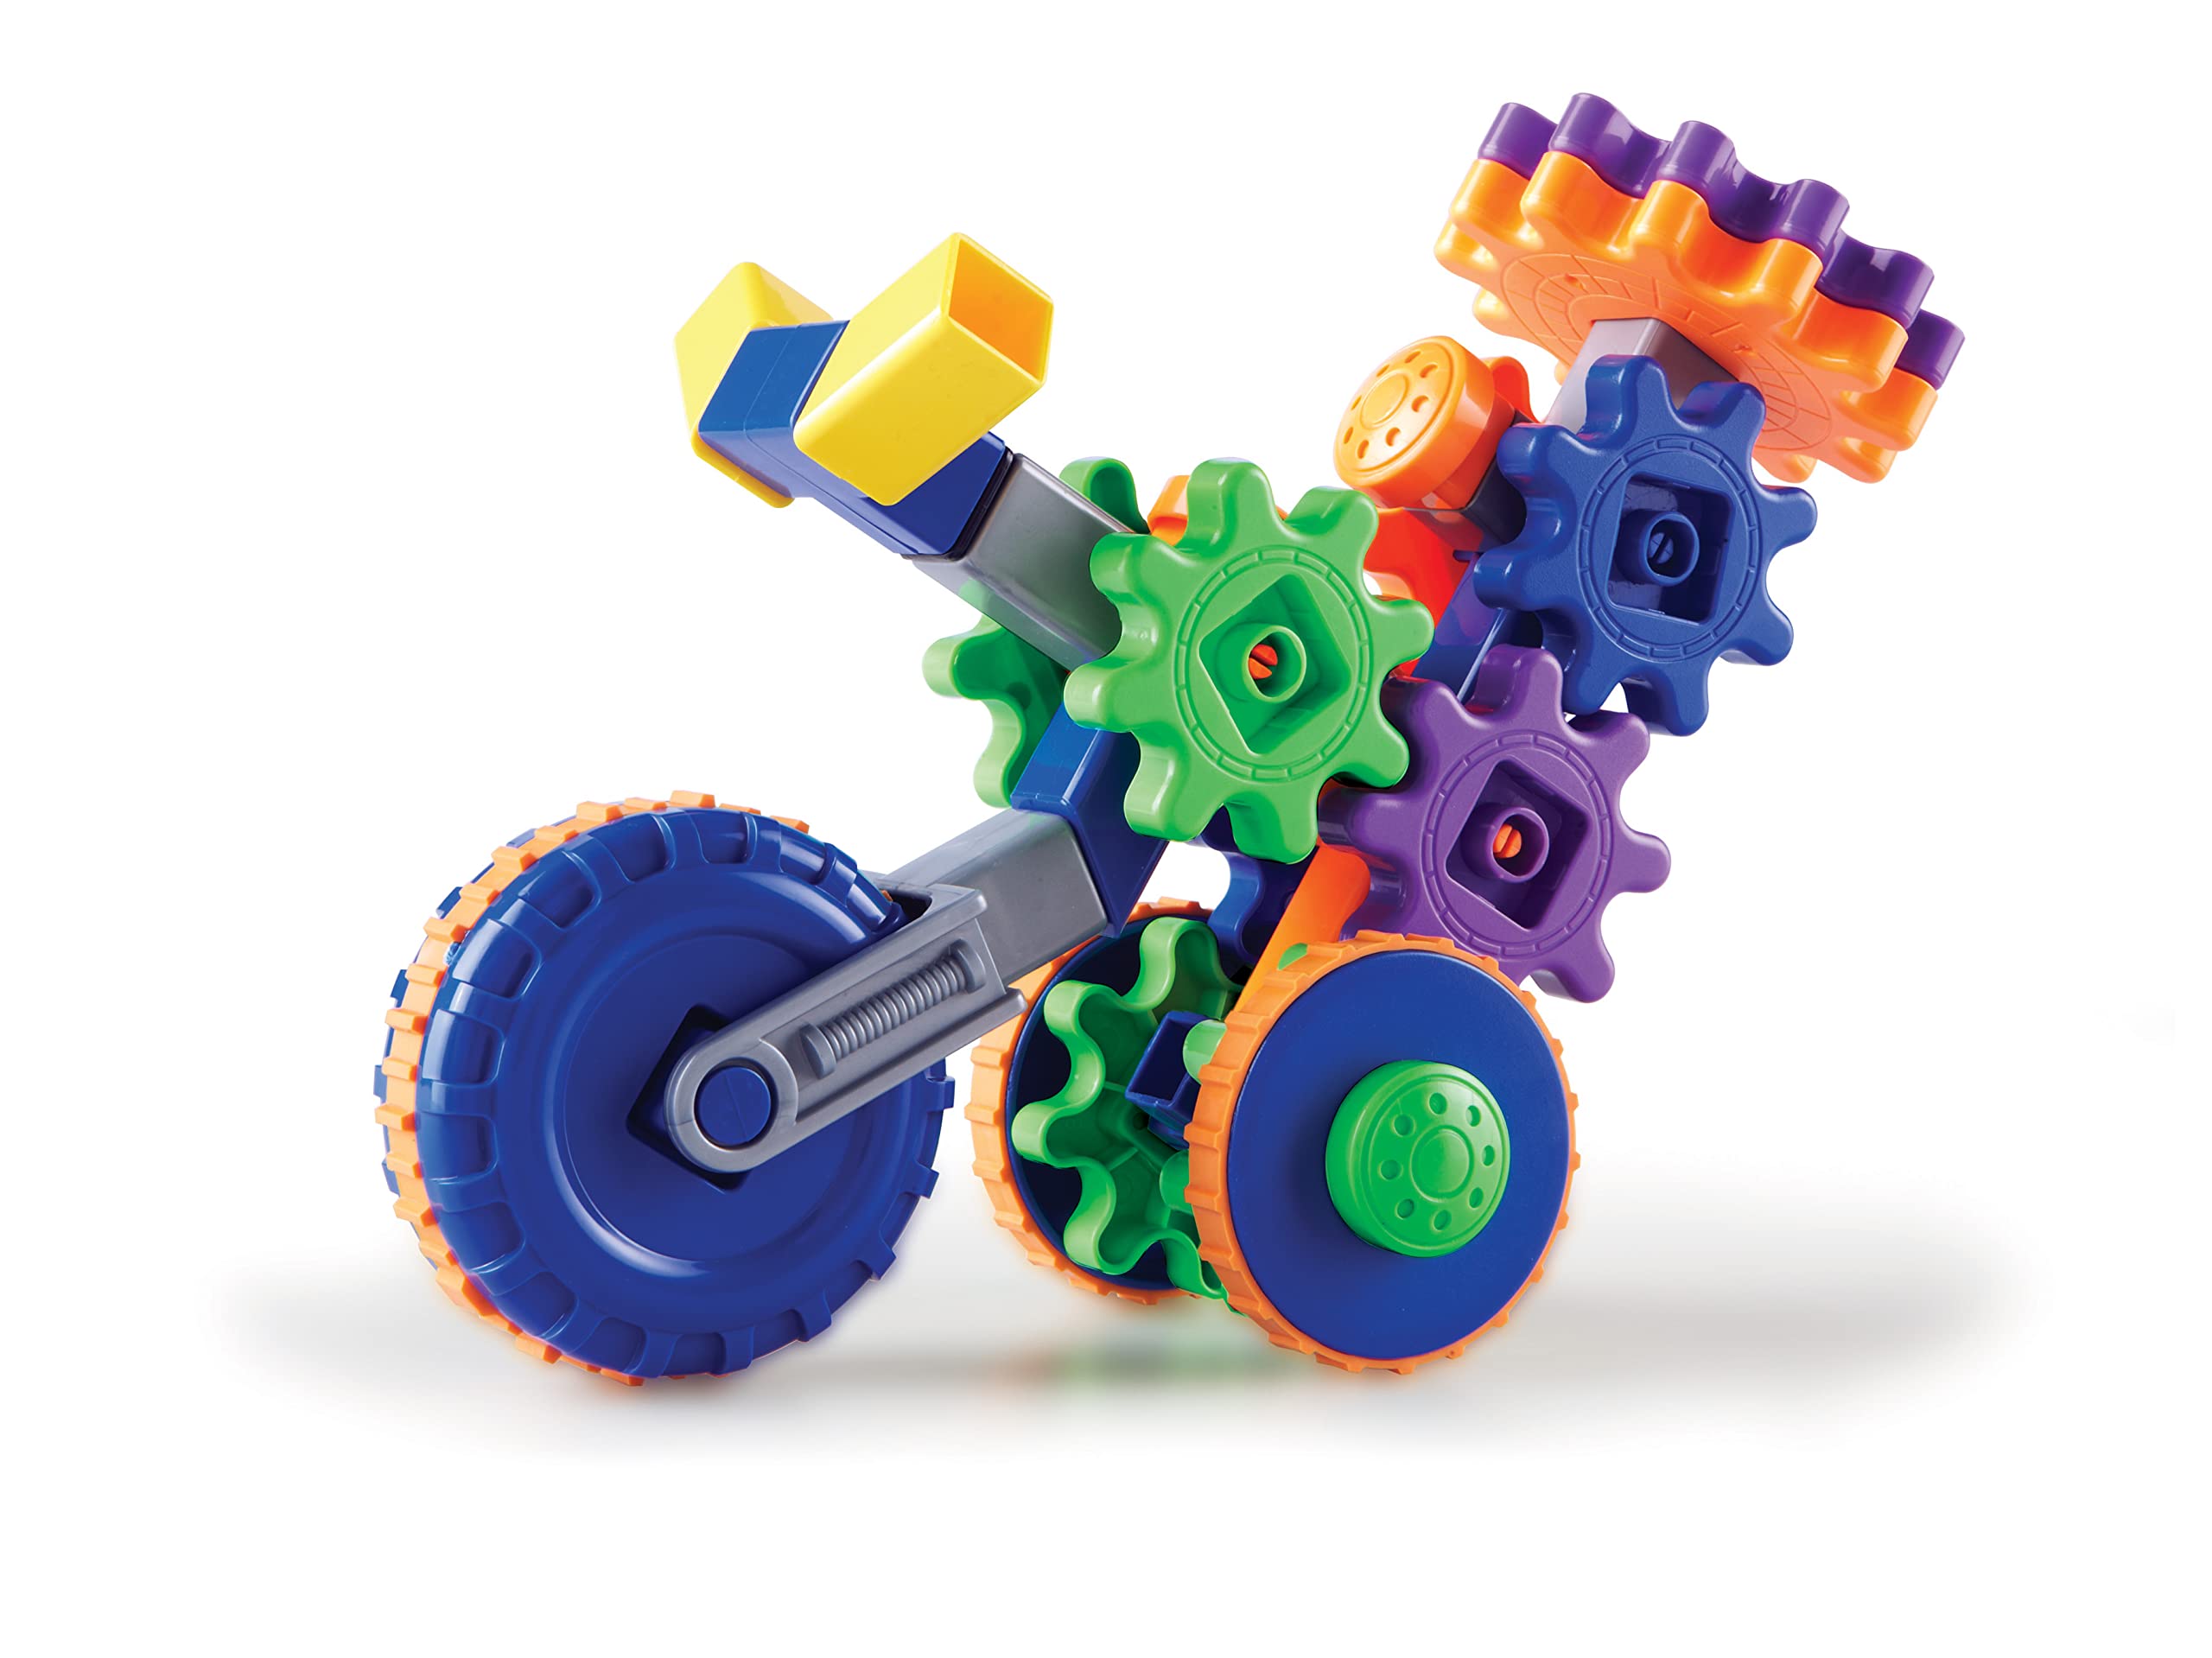 Learning Resources Gears! Gears! Gears! Cycle Gears, Construction, Gear Toy, 30 Pieces, Ages 4+